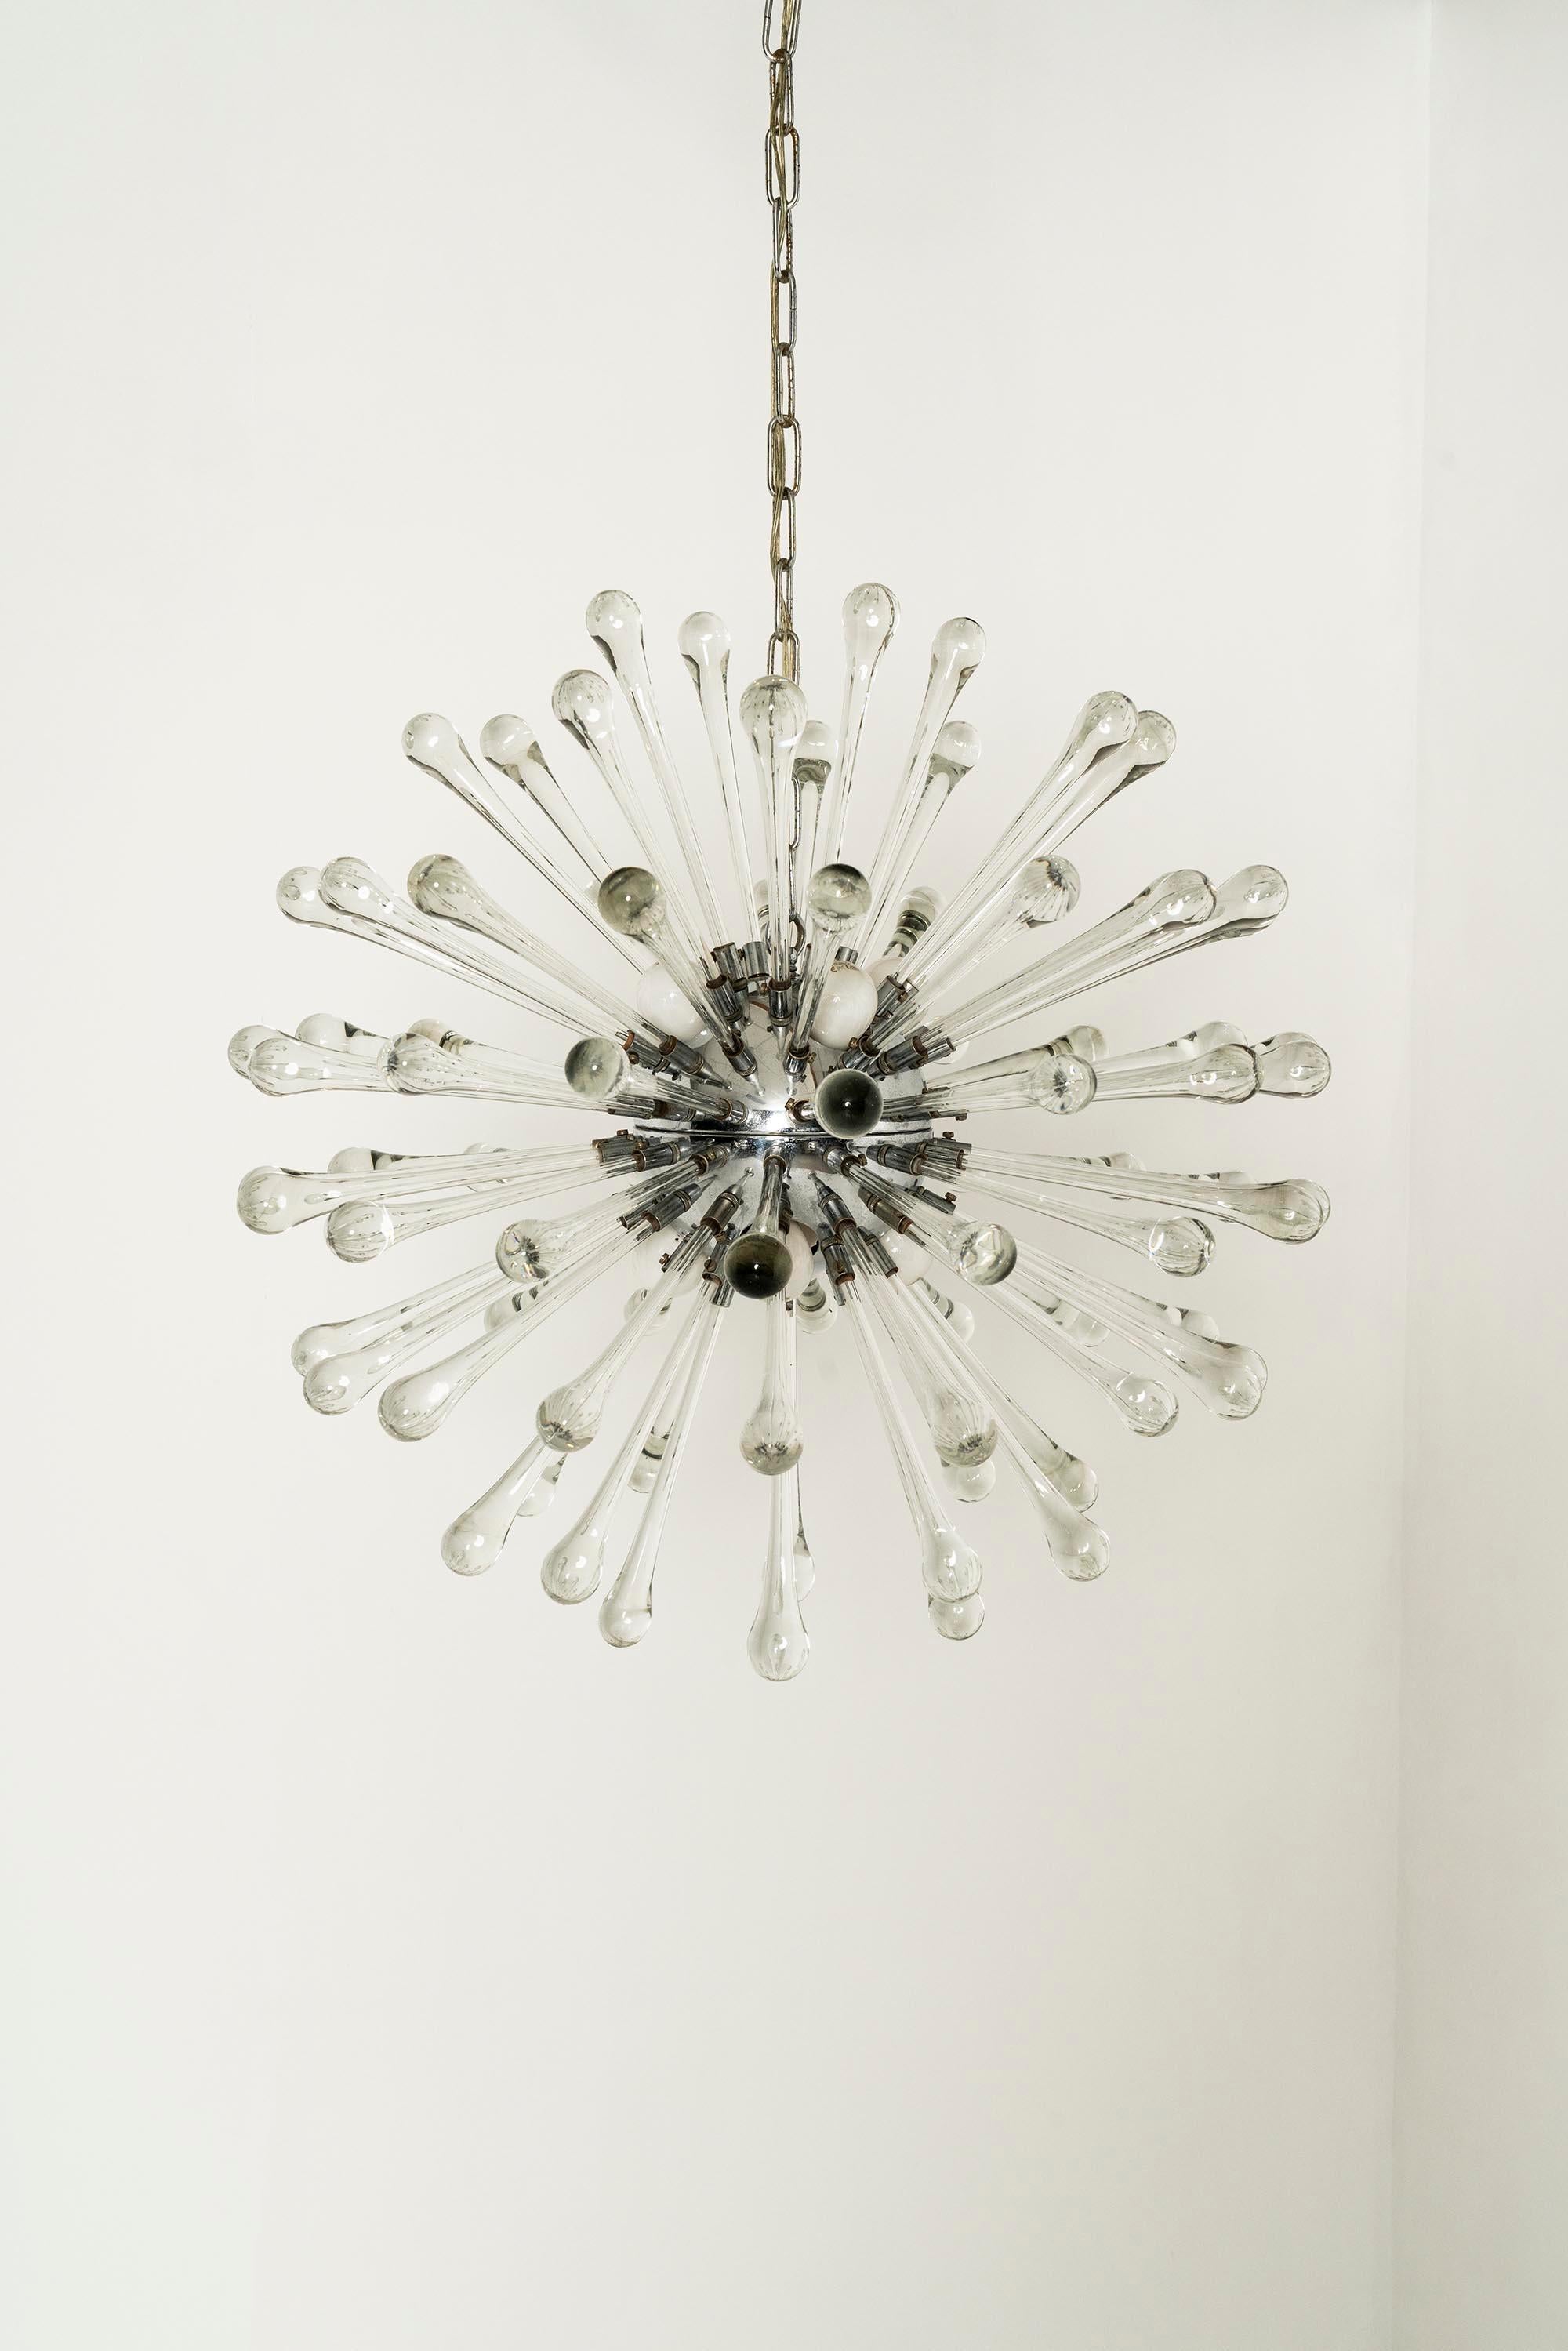 Elegant sputnik chandelier with transparent Murano glass drops attached to a metal sphere from the 1960s. This striking and eye-catching chandelier will most definitely give a chic and elegant touch to your interior. The metal sphere holds up the